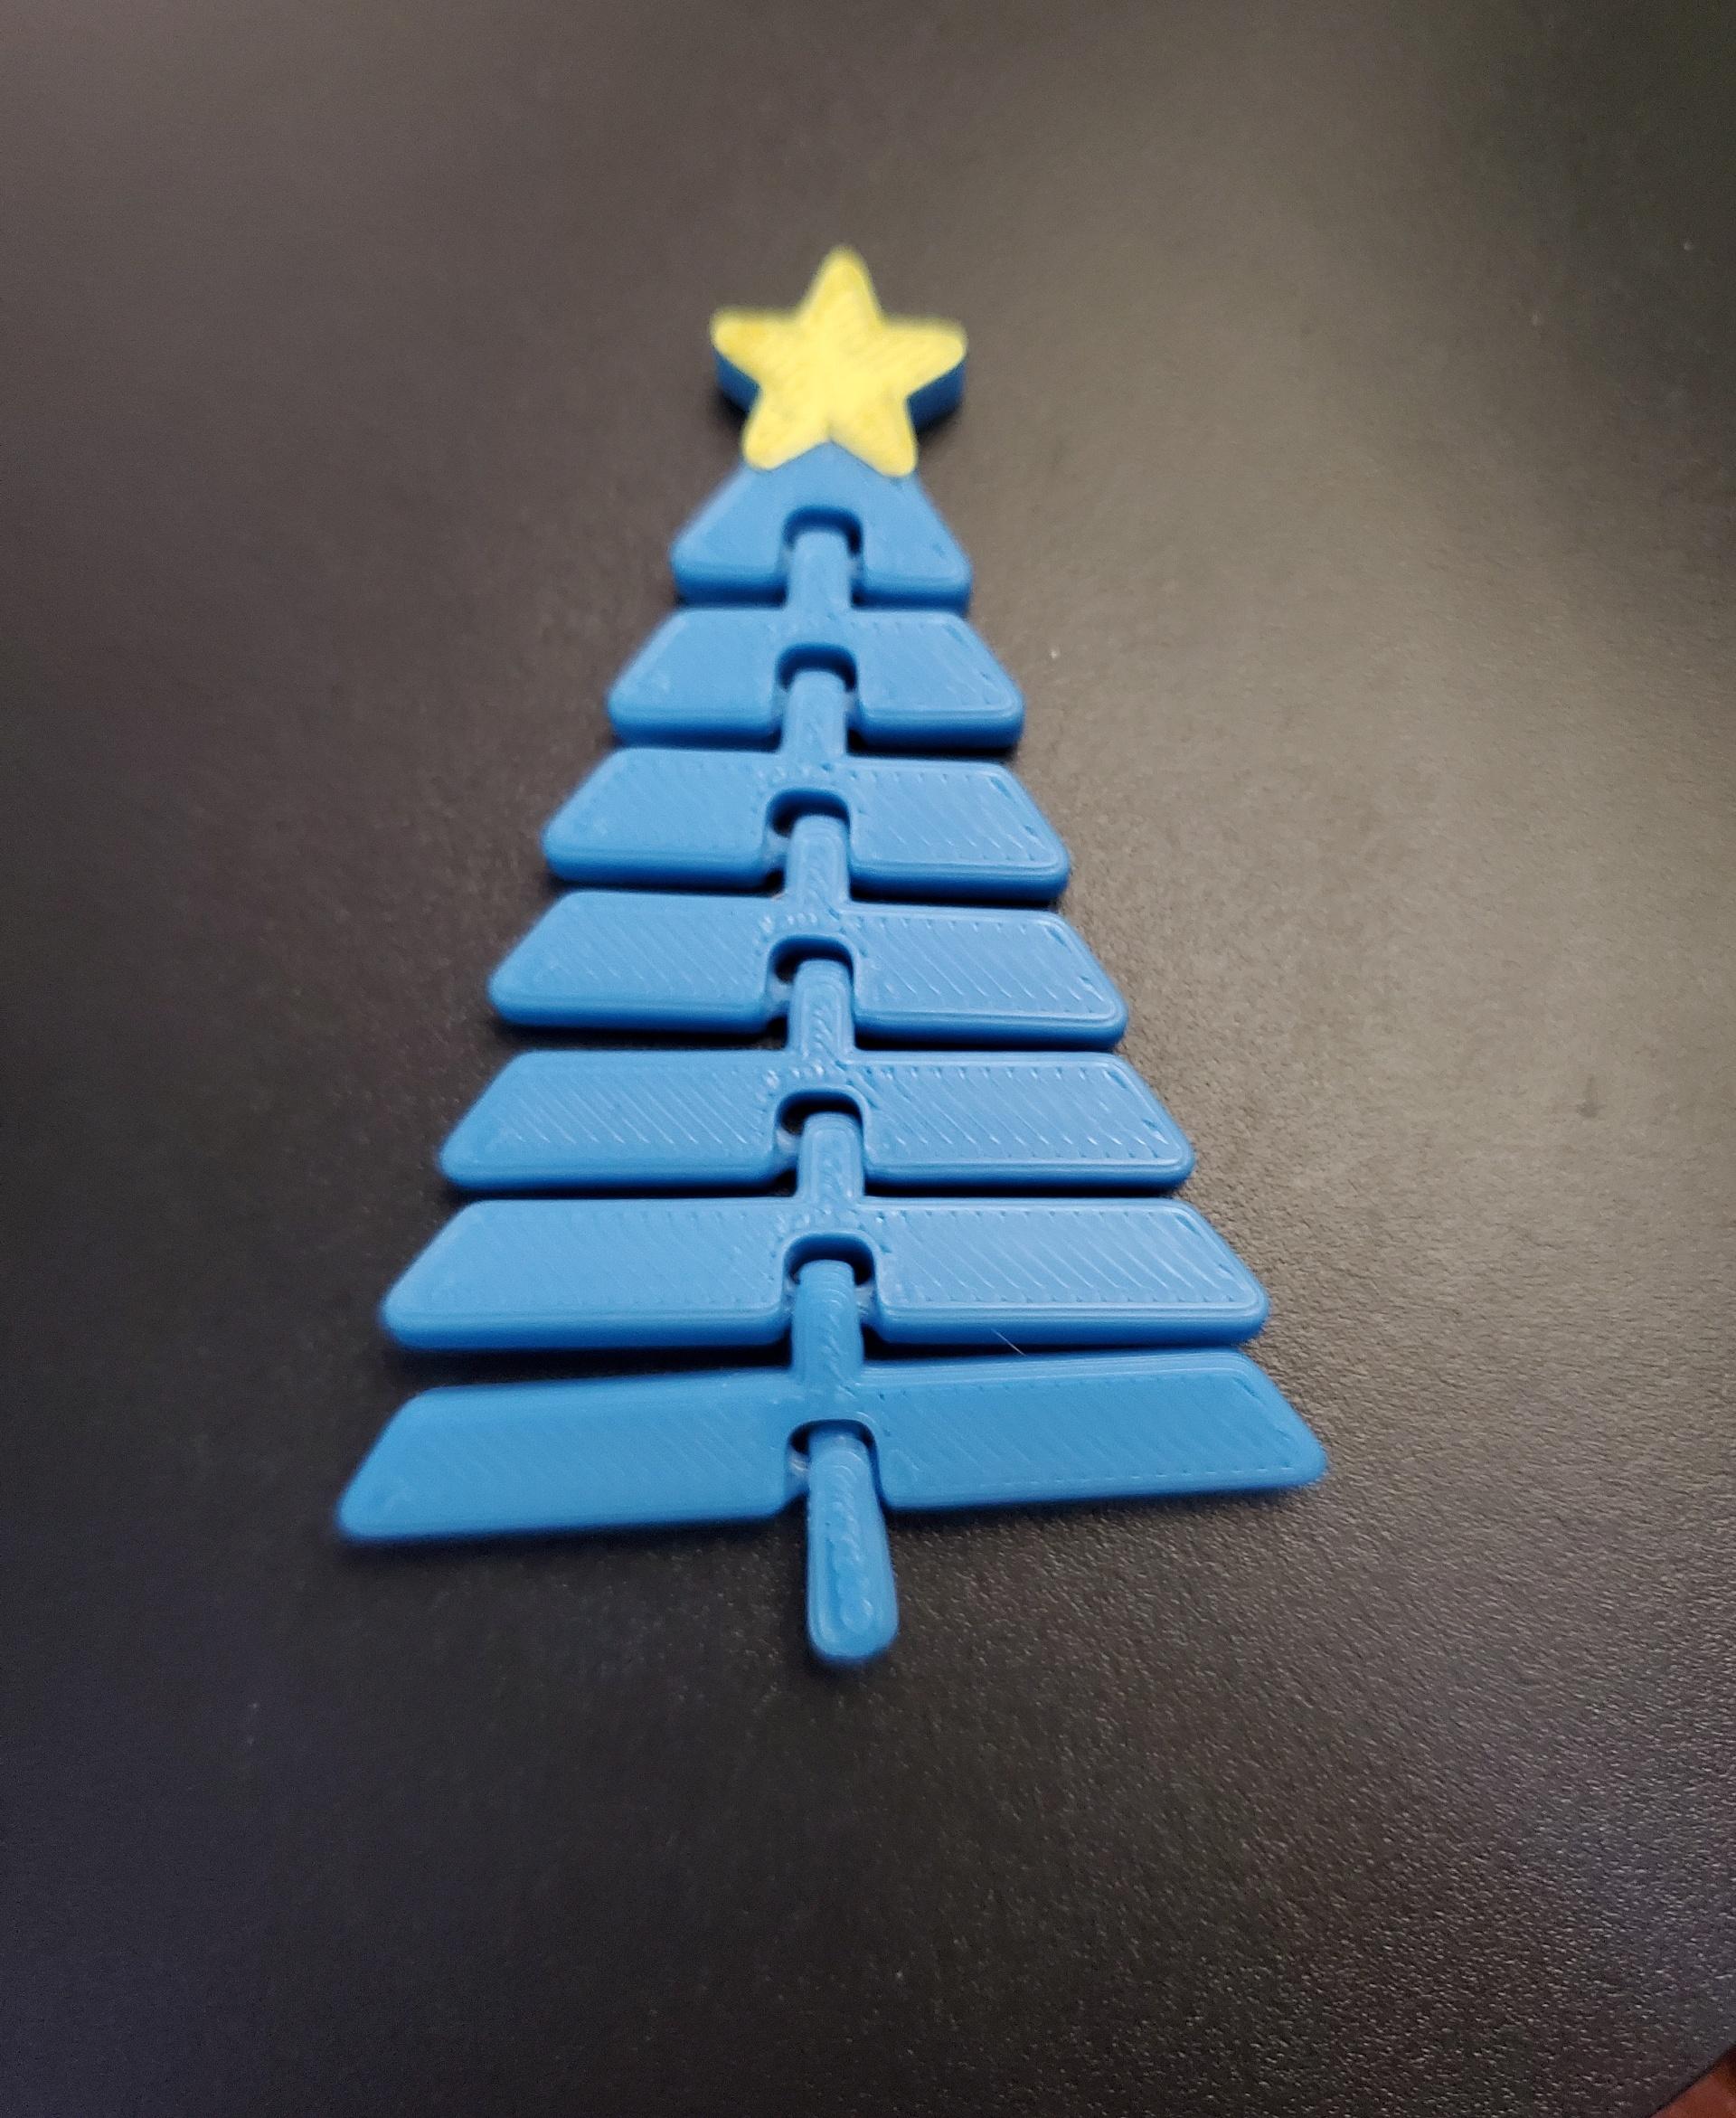 Articulated Christmas Tree with Star - Print in place fidget toy - 3mf - hobbyking sky blue - 3d model